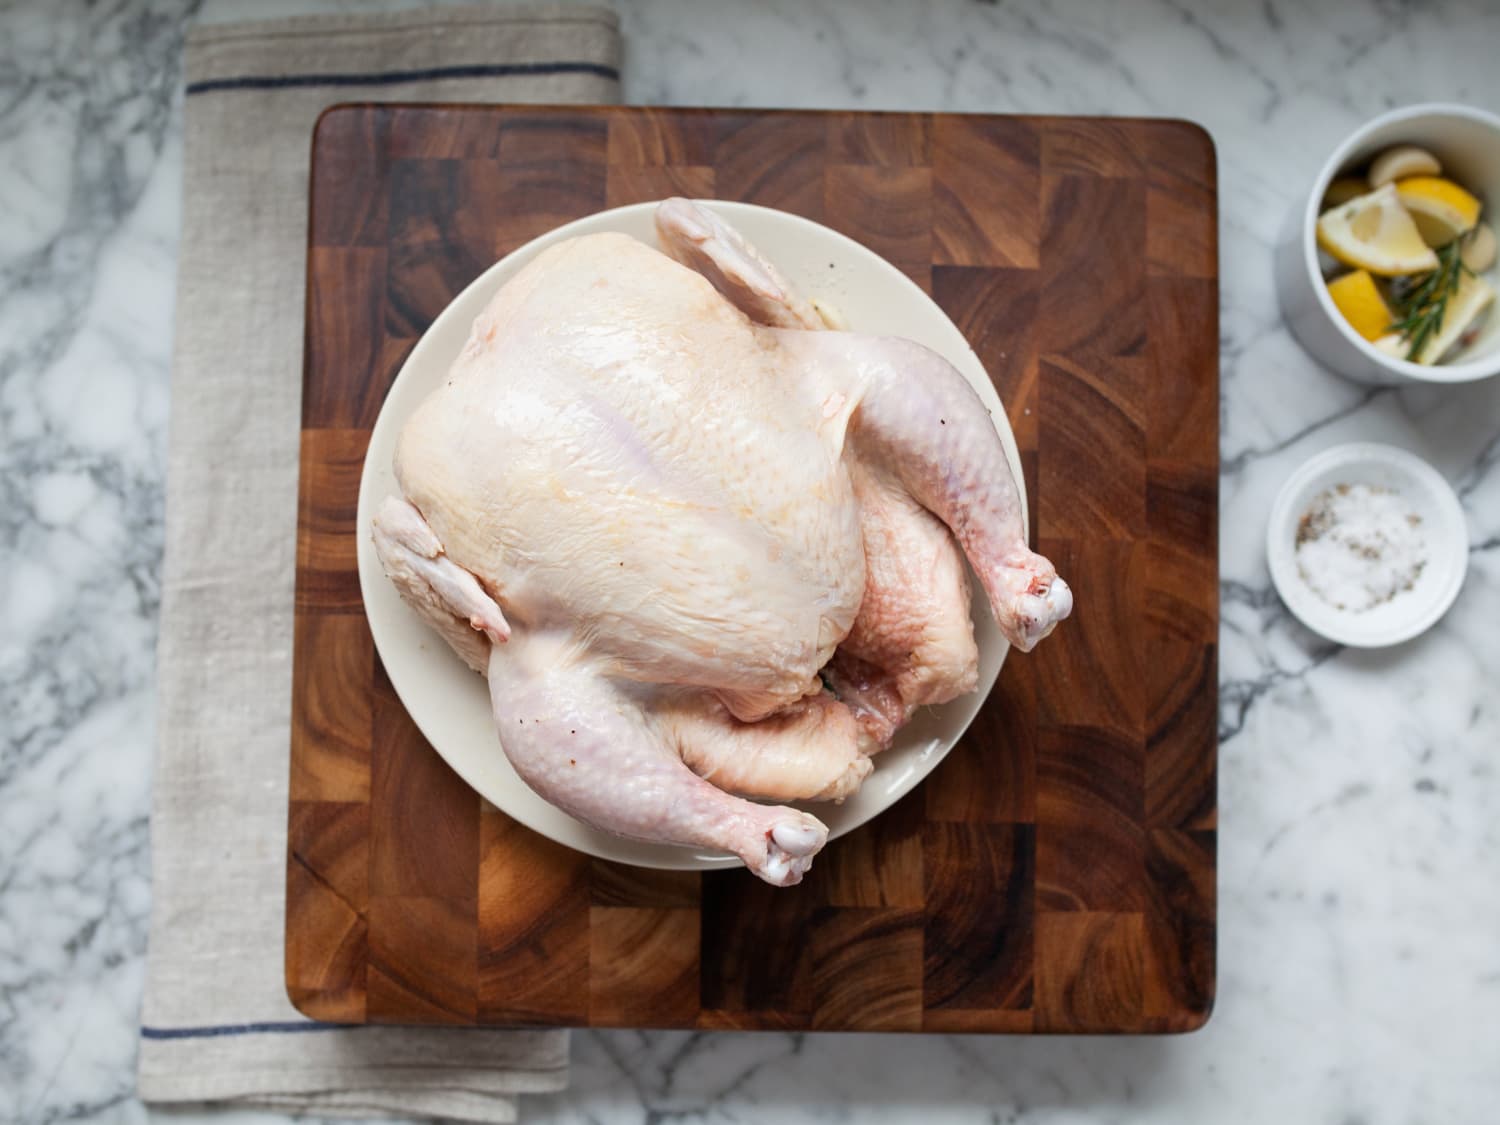 Temperature of cooked chicken: How to cook chicken safely